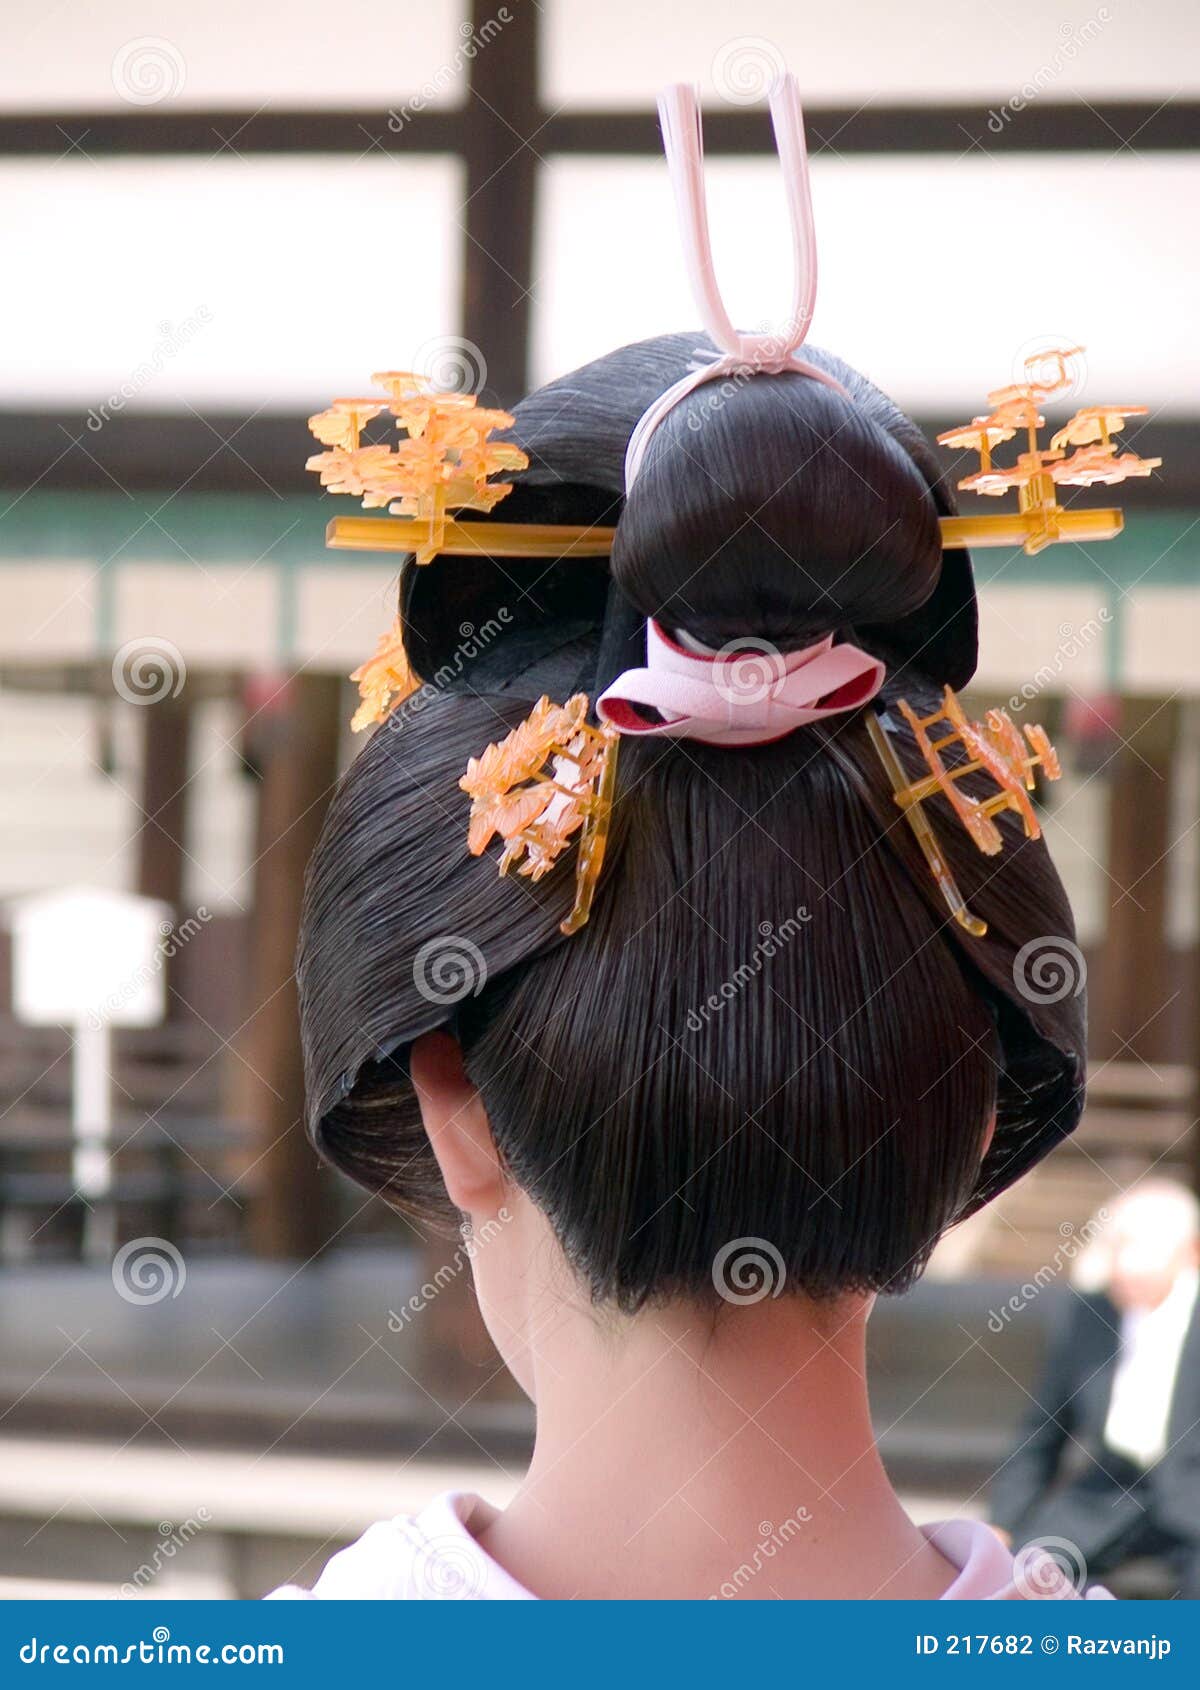 Kyoto Fan - Hello, Kyoto Fans! Look at this gorgeous hairstyle! Junior  maiko (geisha apprentices) wear these elaborate coiffures, called  “wareshinobu”, with multiple large and colorful ornaments chosen to match  the season